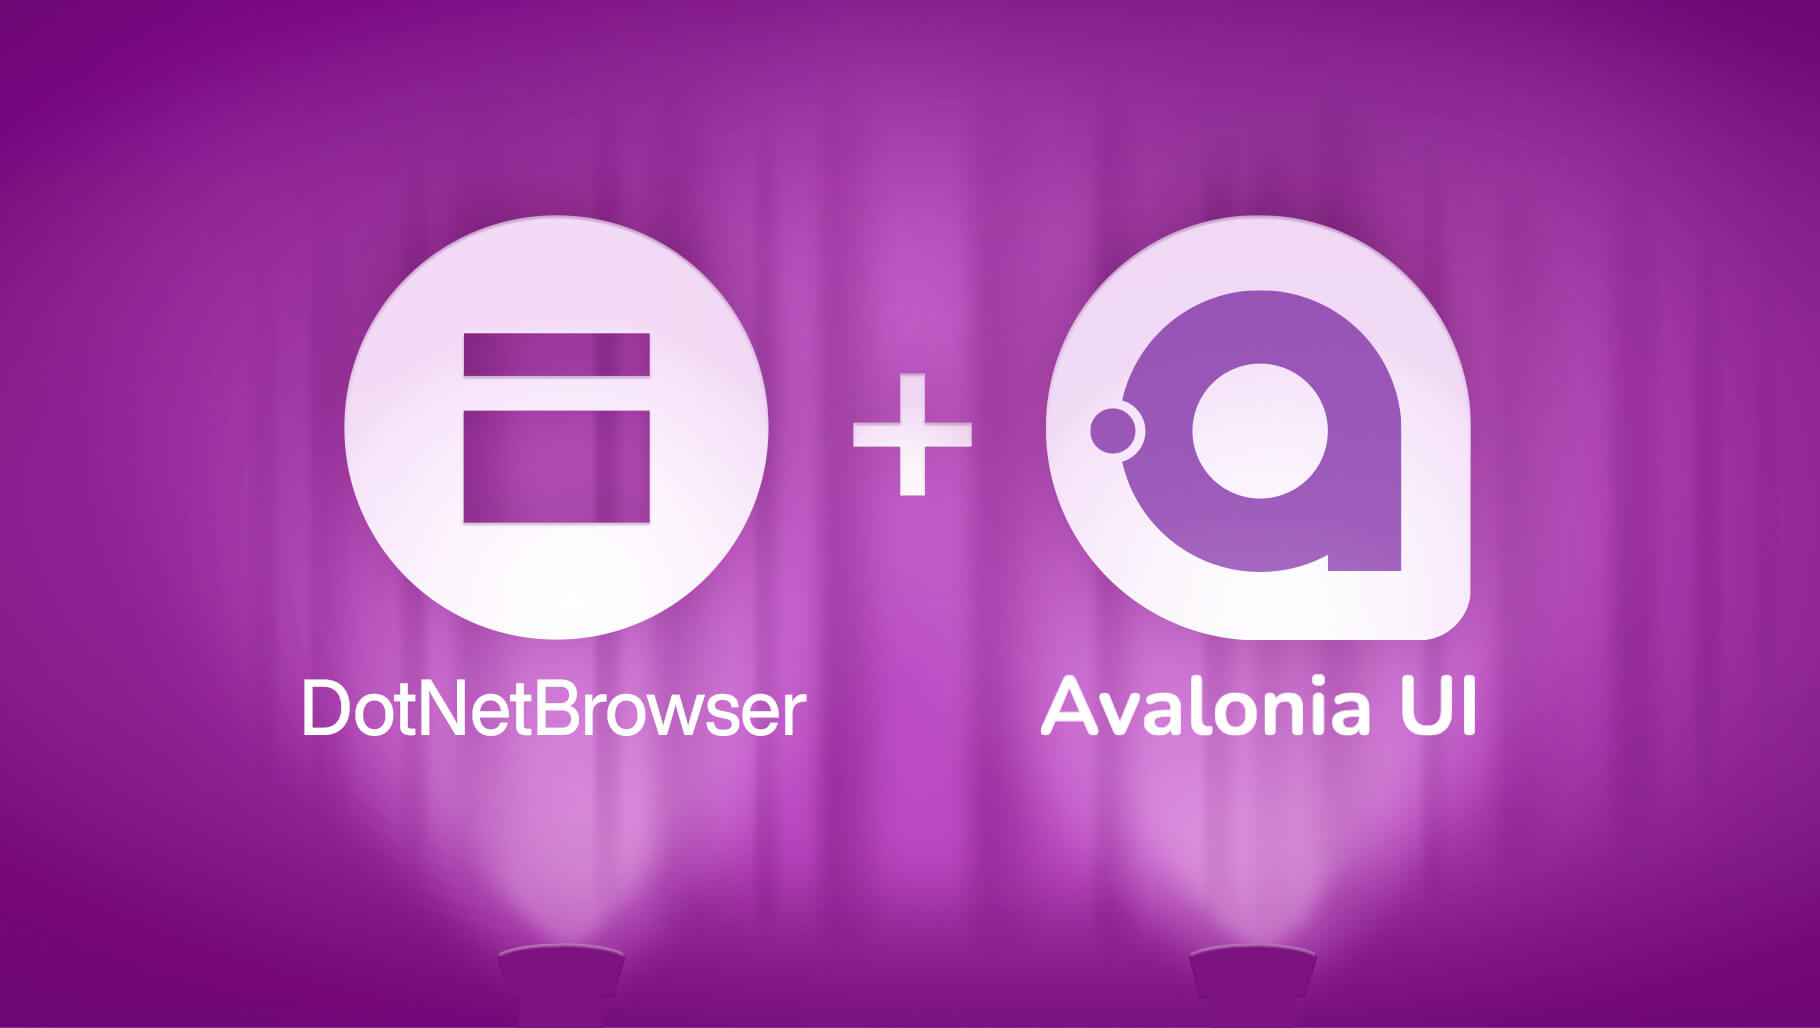 DotNetBrowser supports Avalonia UI!